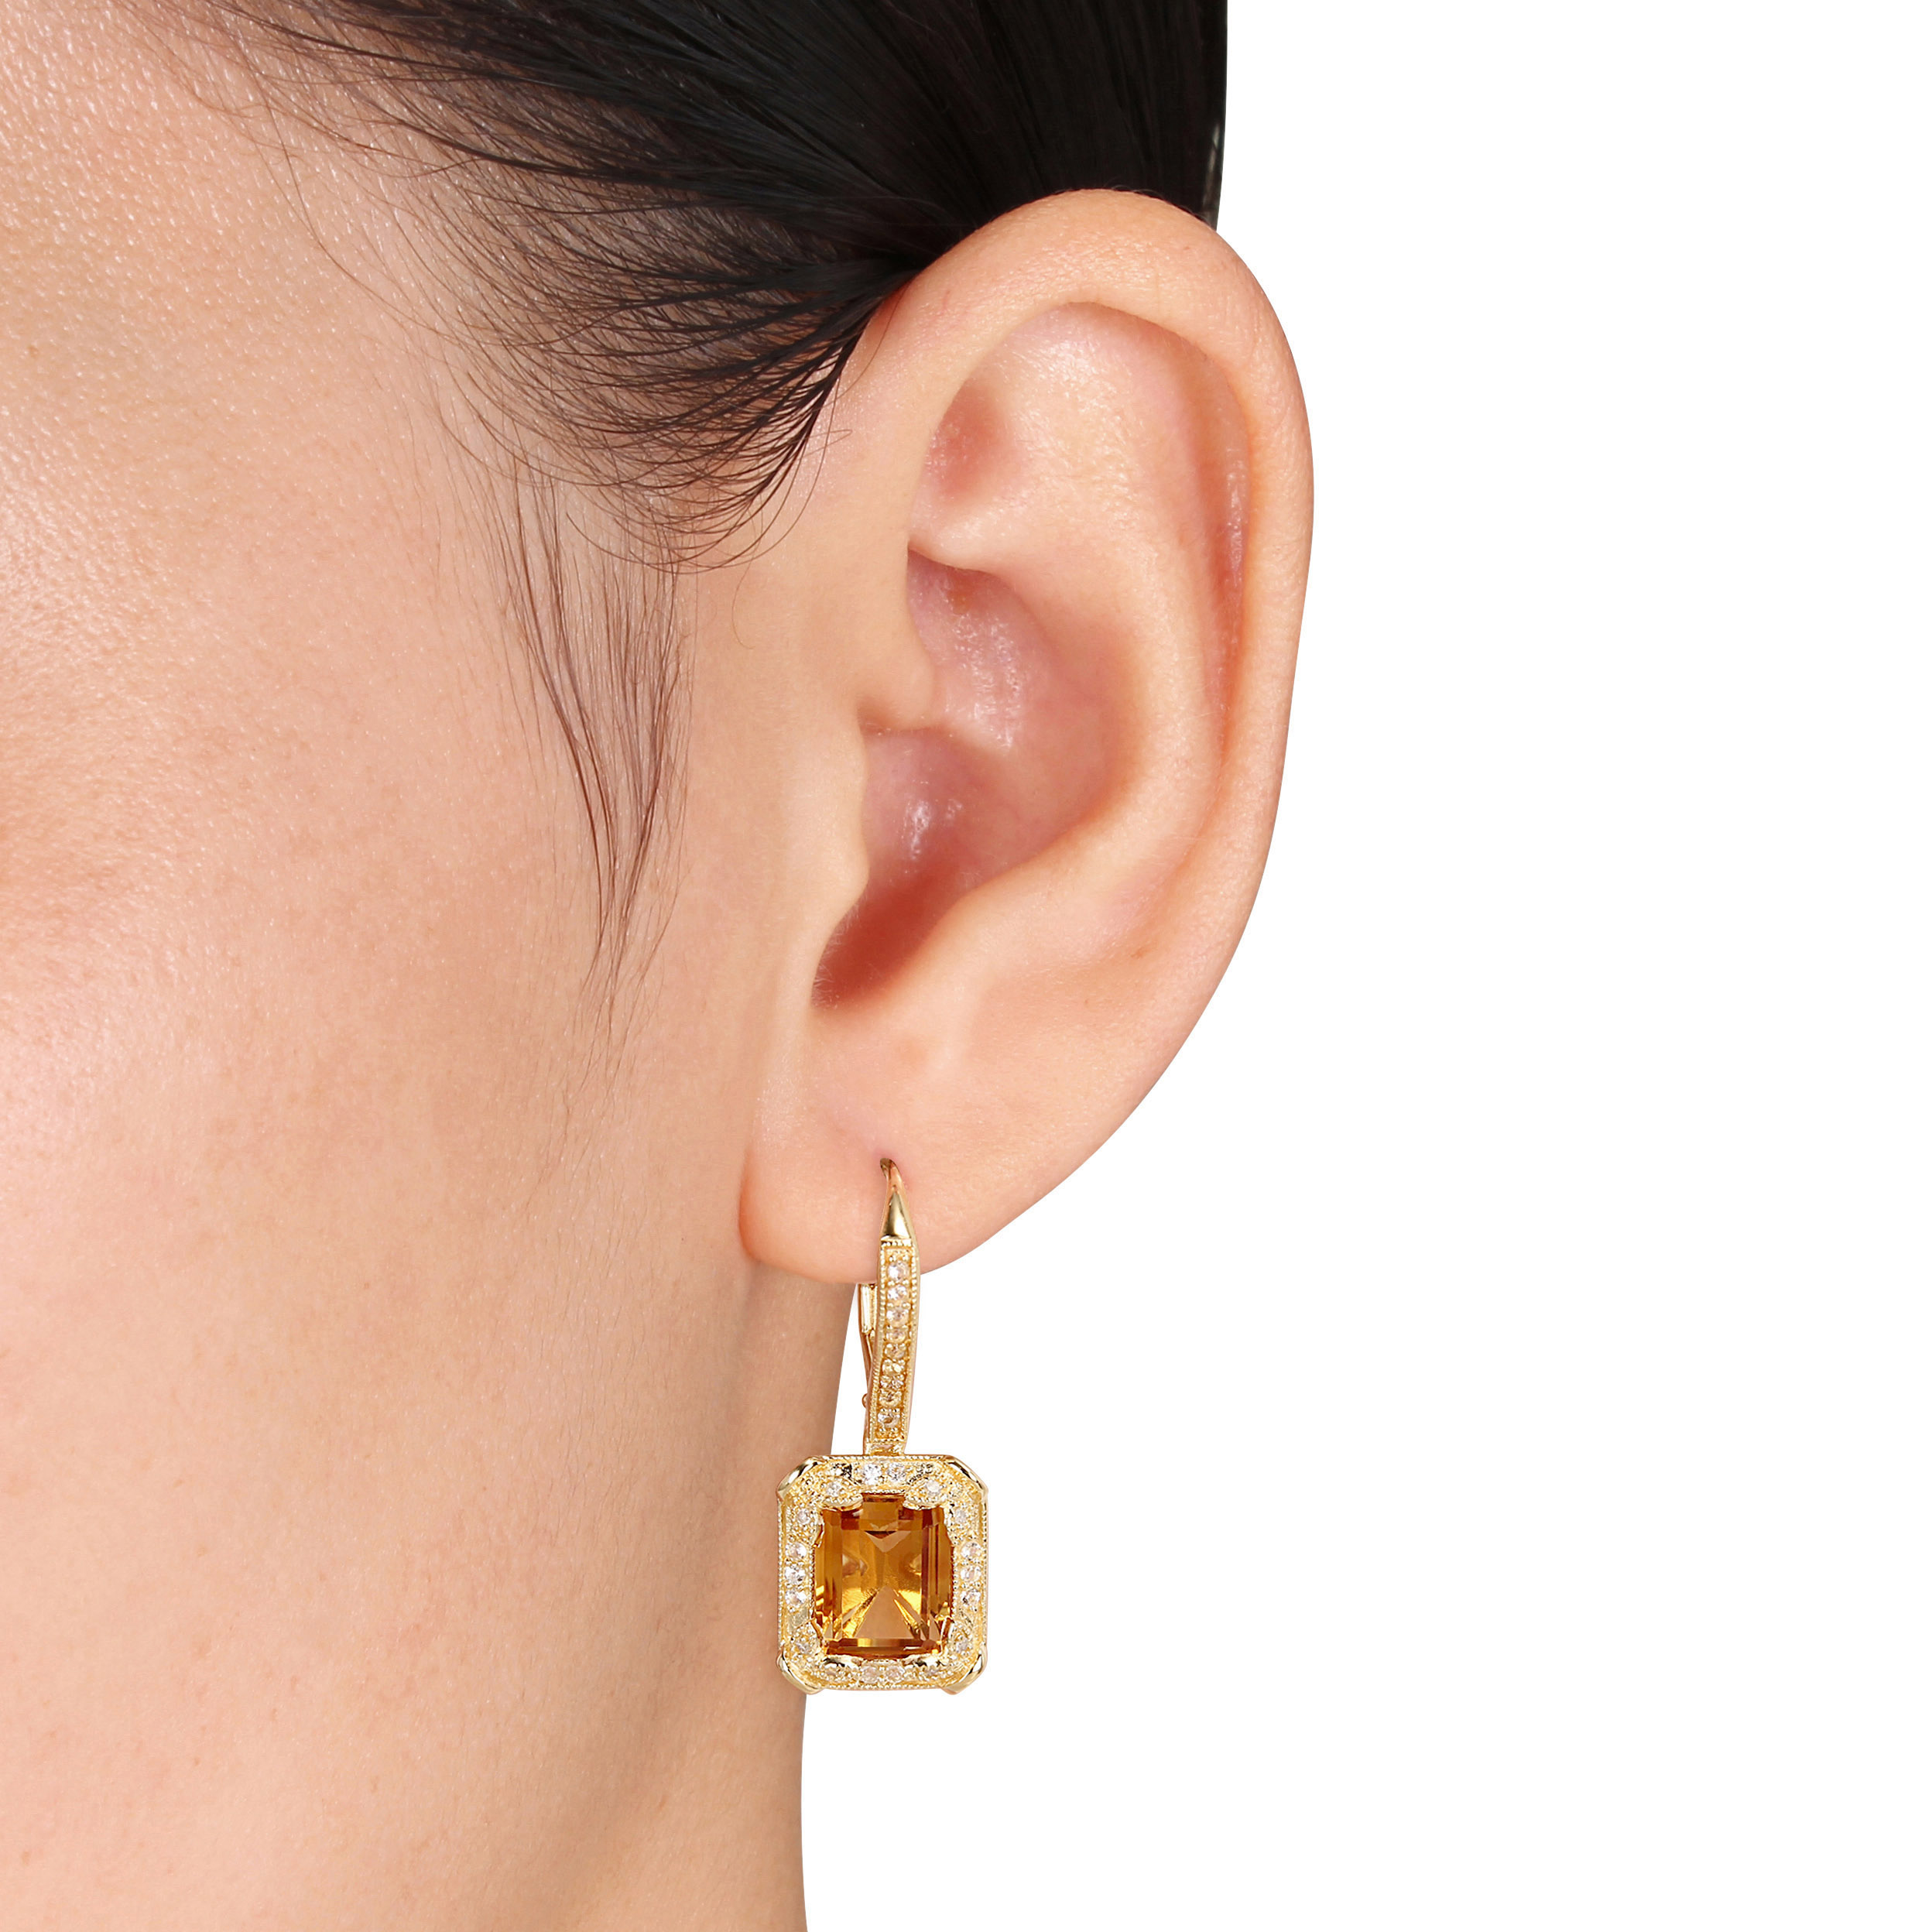 6 3/5 CT TGW Citrine, White Topaz and 1/10 CT TW Diamond Leverback Earrings in Yellow Plated Sterling Silver